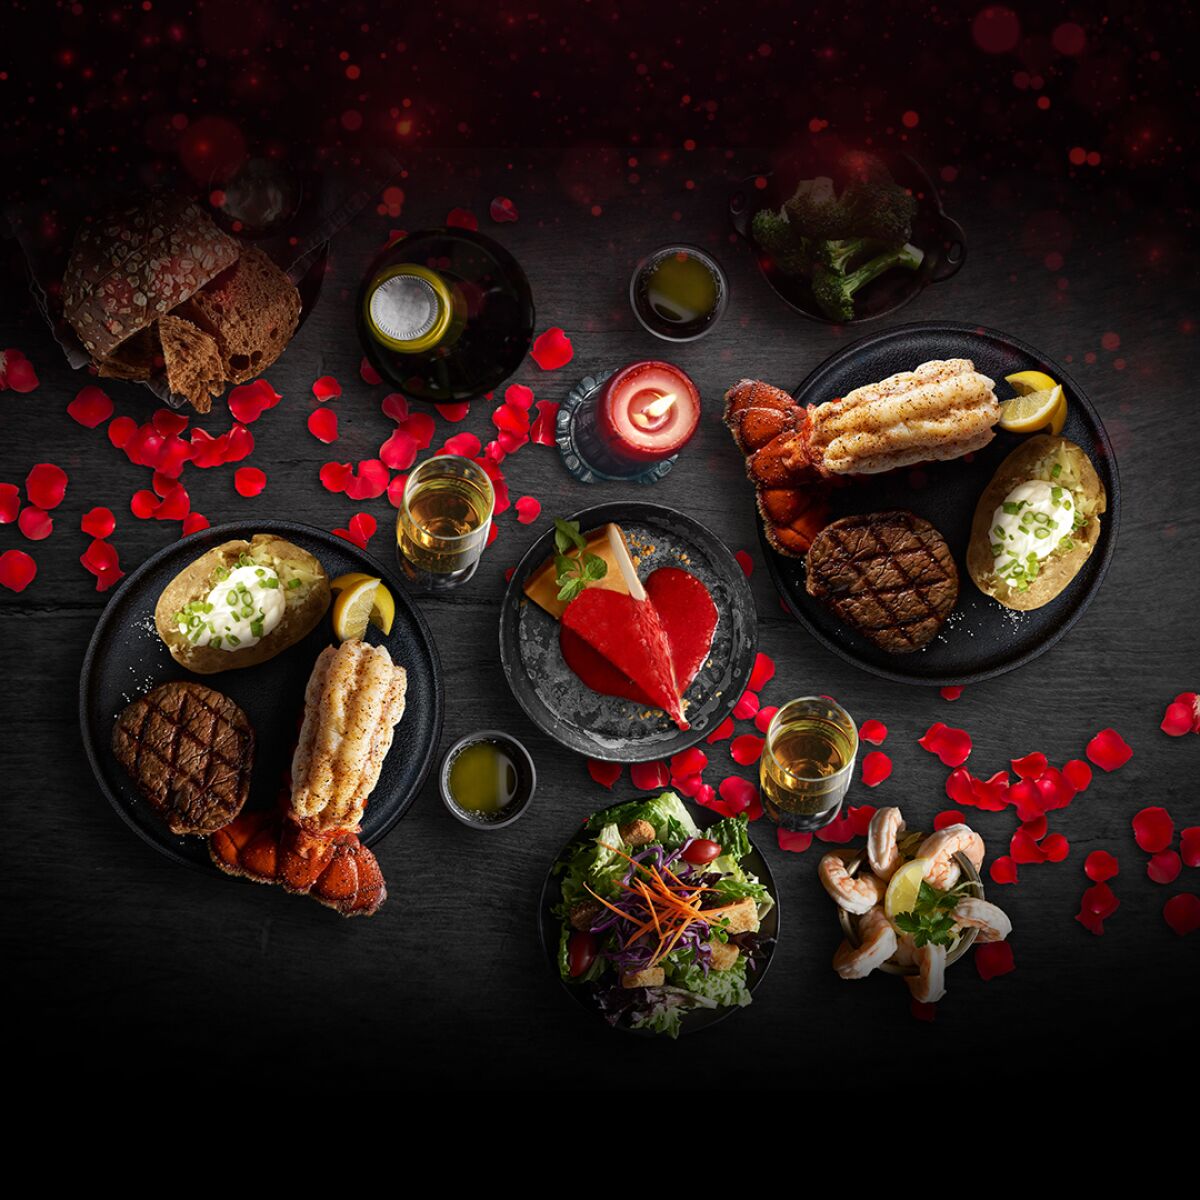 Black Angus steakhouses are offering a Valentine's Day feast for two Feb. 11-14.